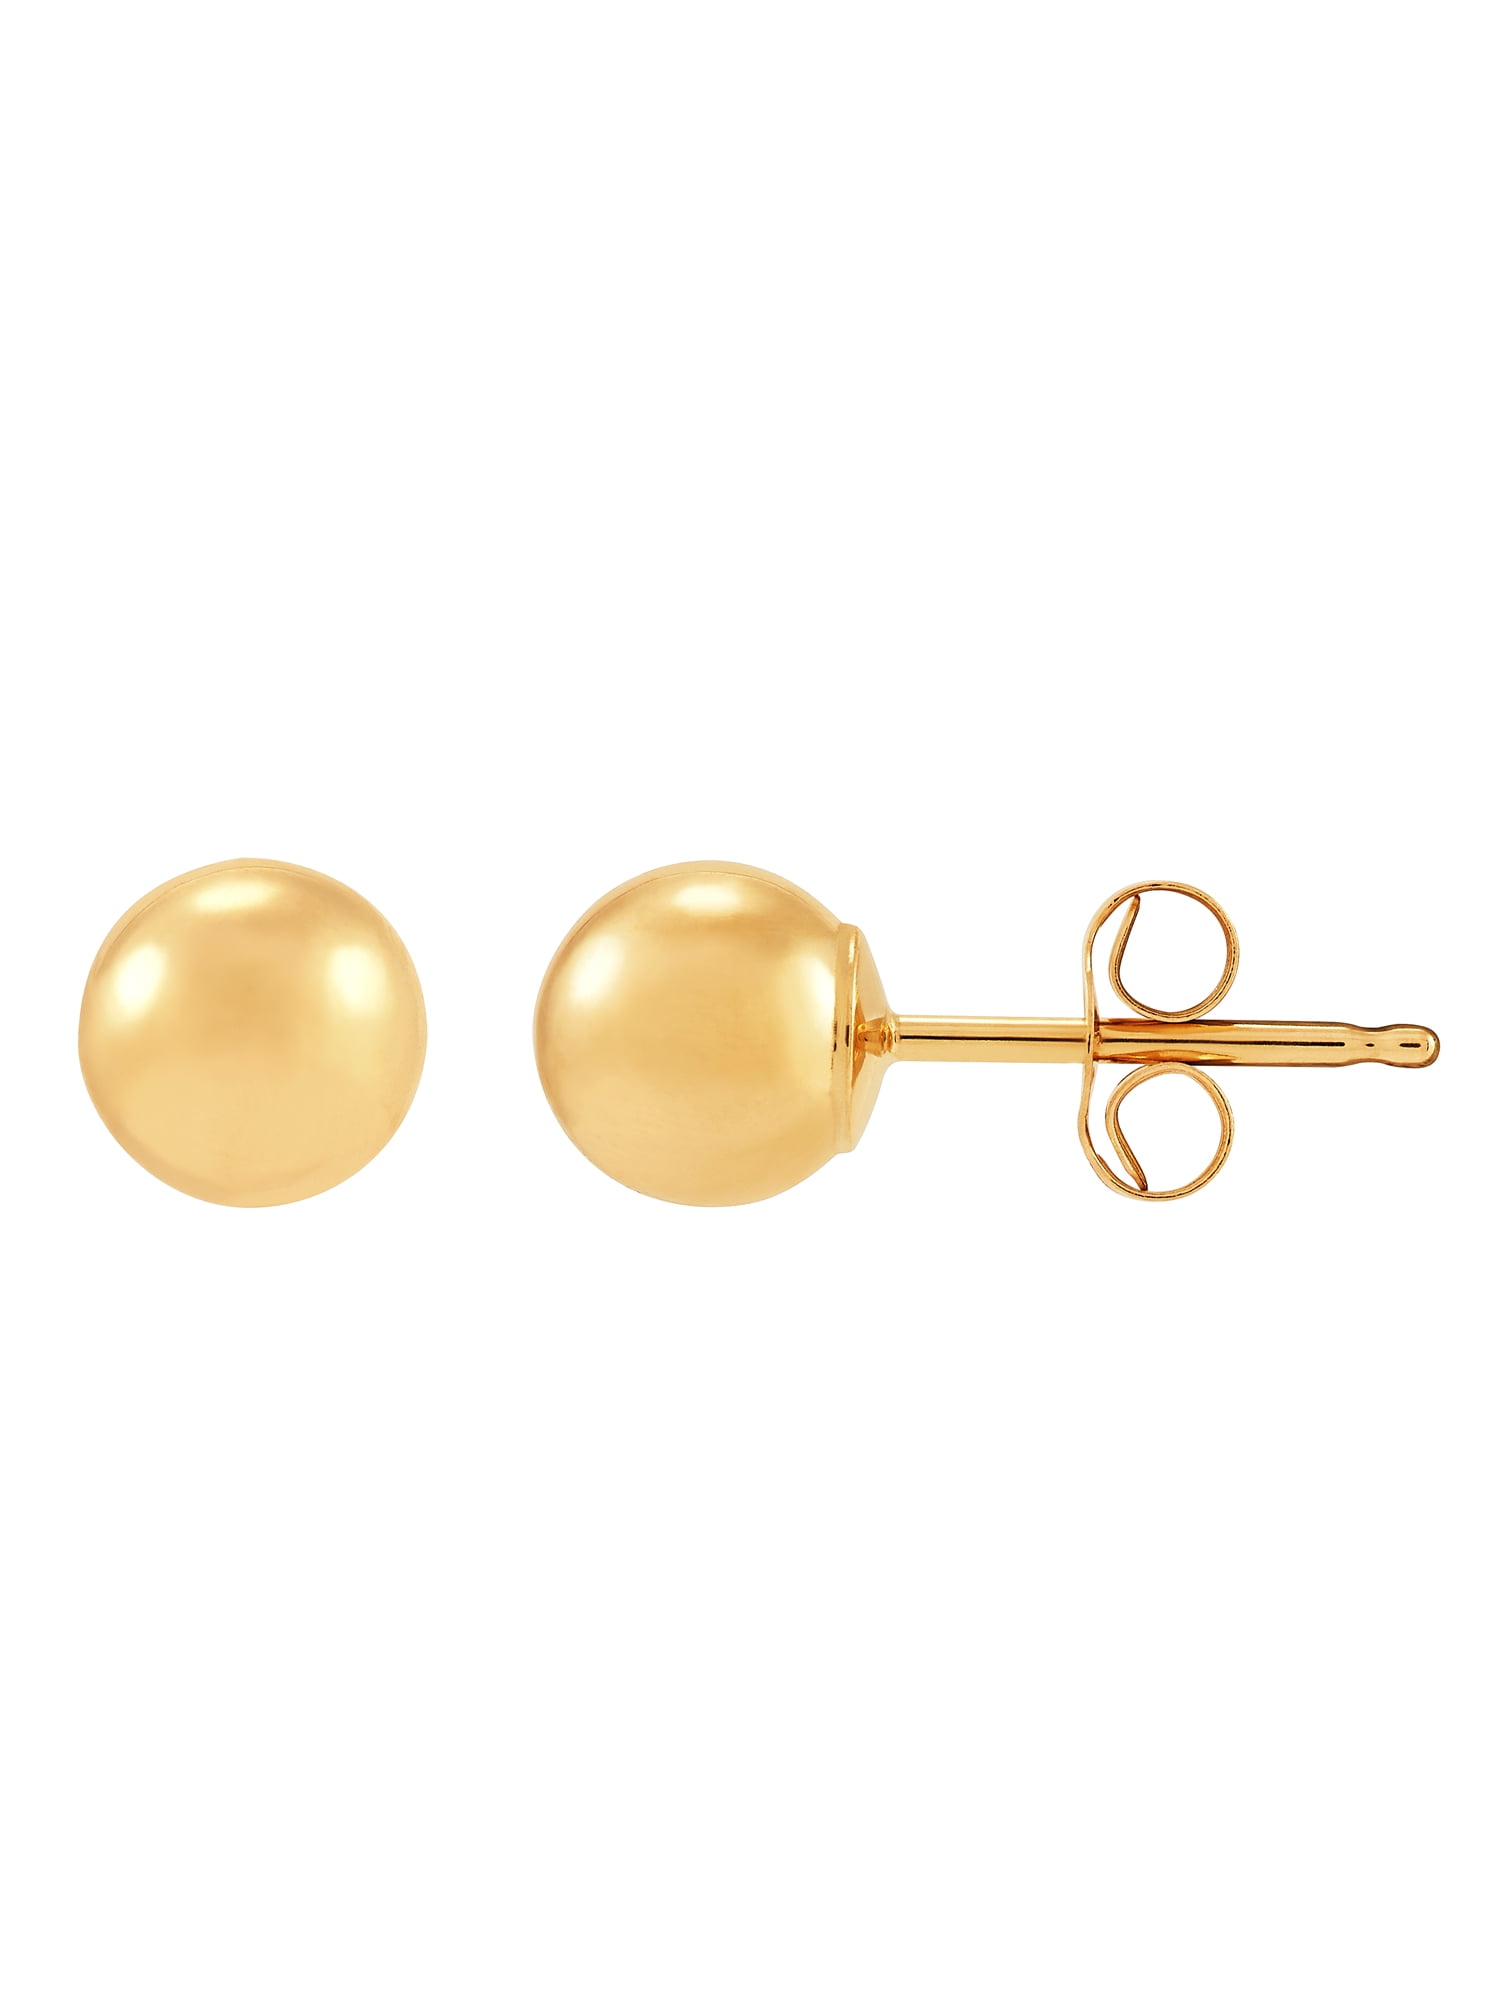 4mm Round Synthetic Pearl Ball 14k Yellow Gold Stud Earrings